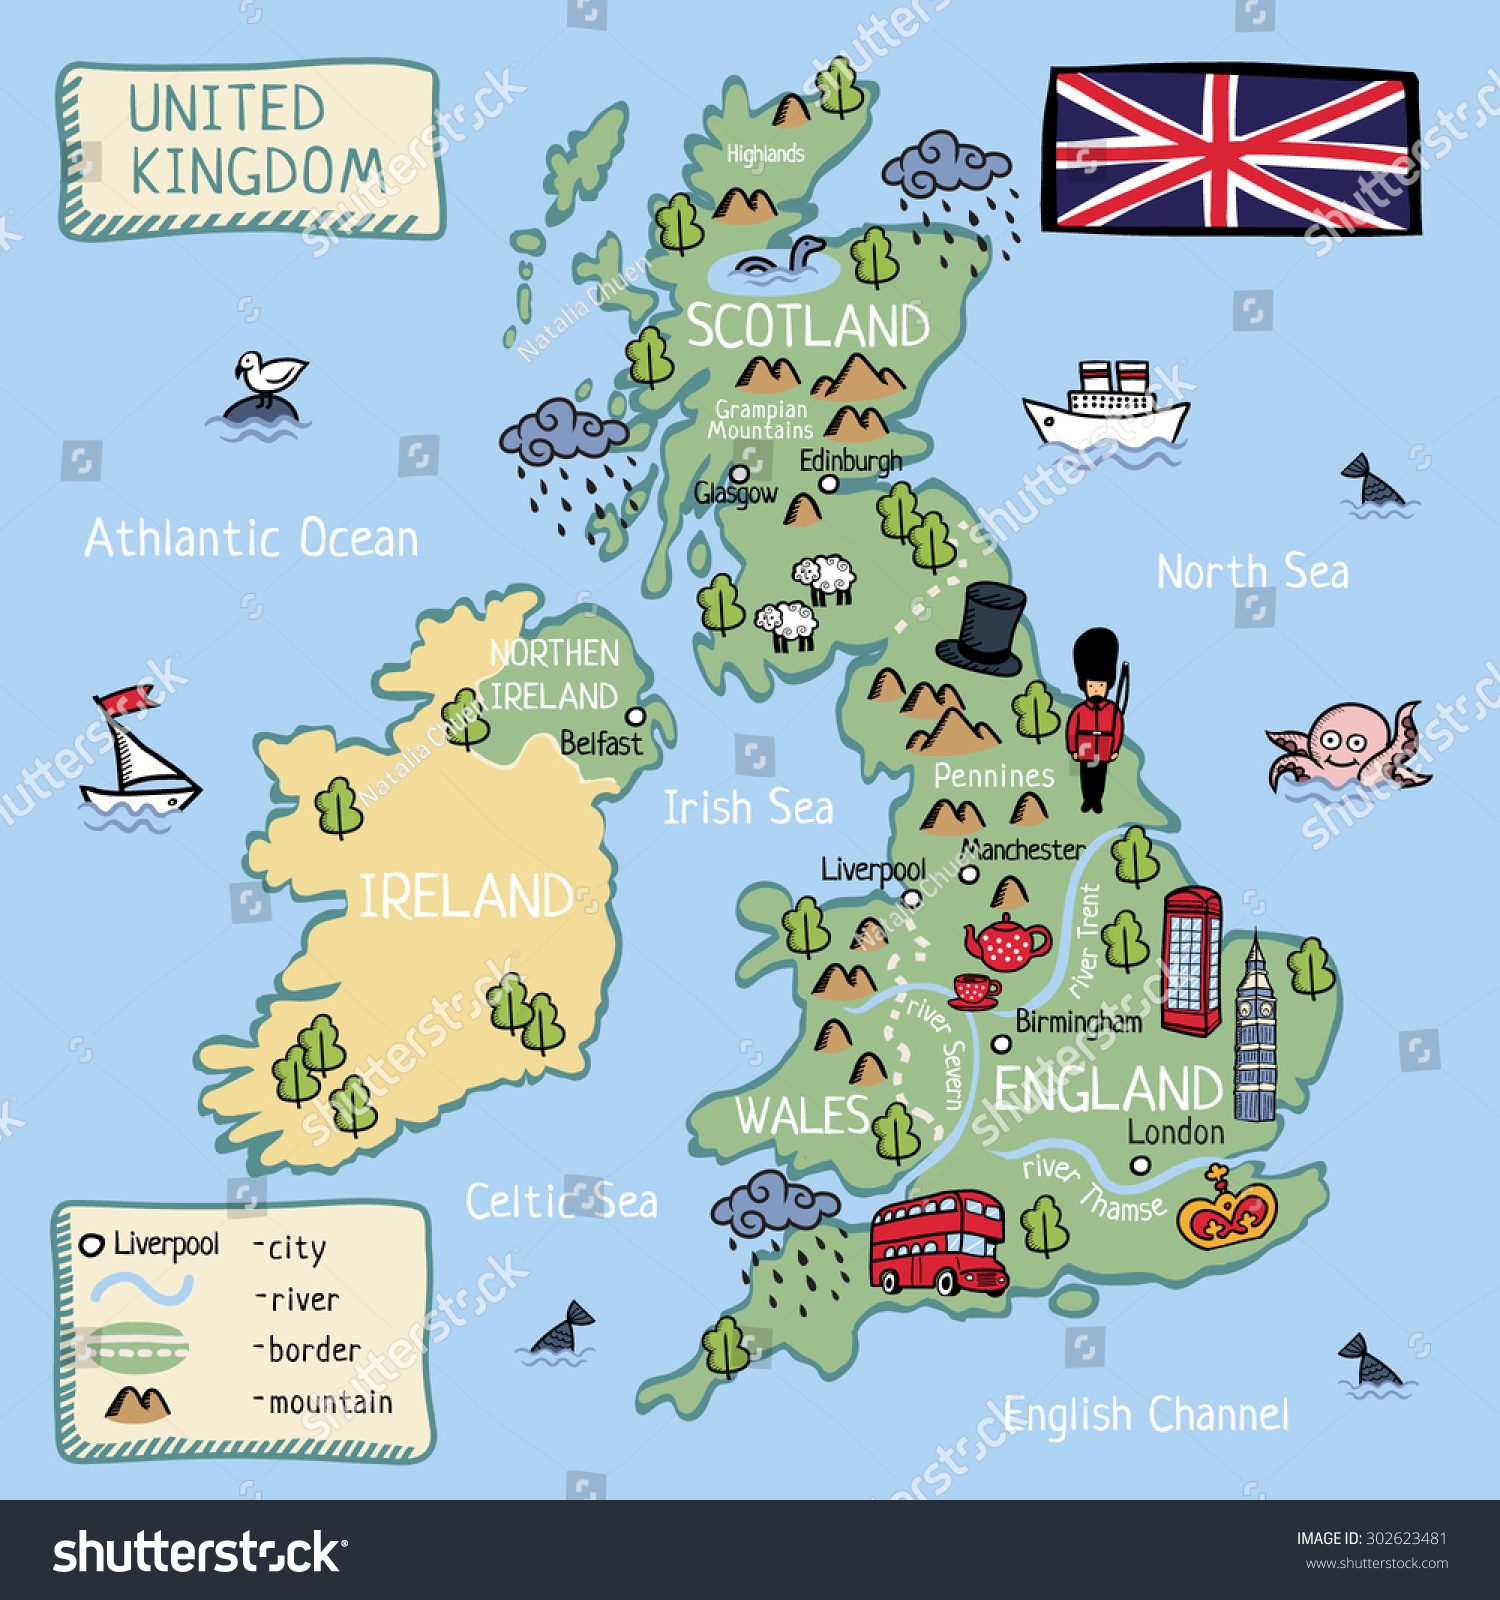 clipart england map - photo #47